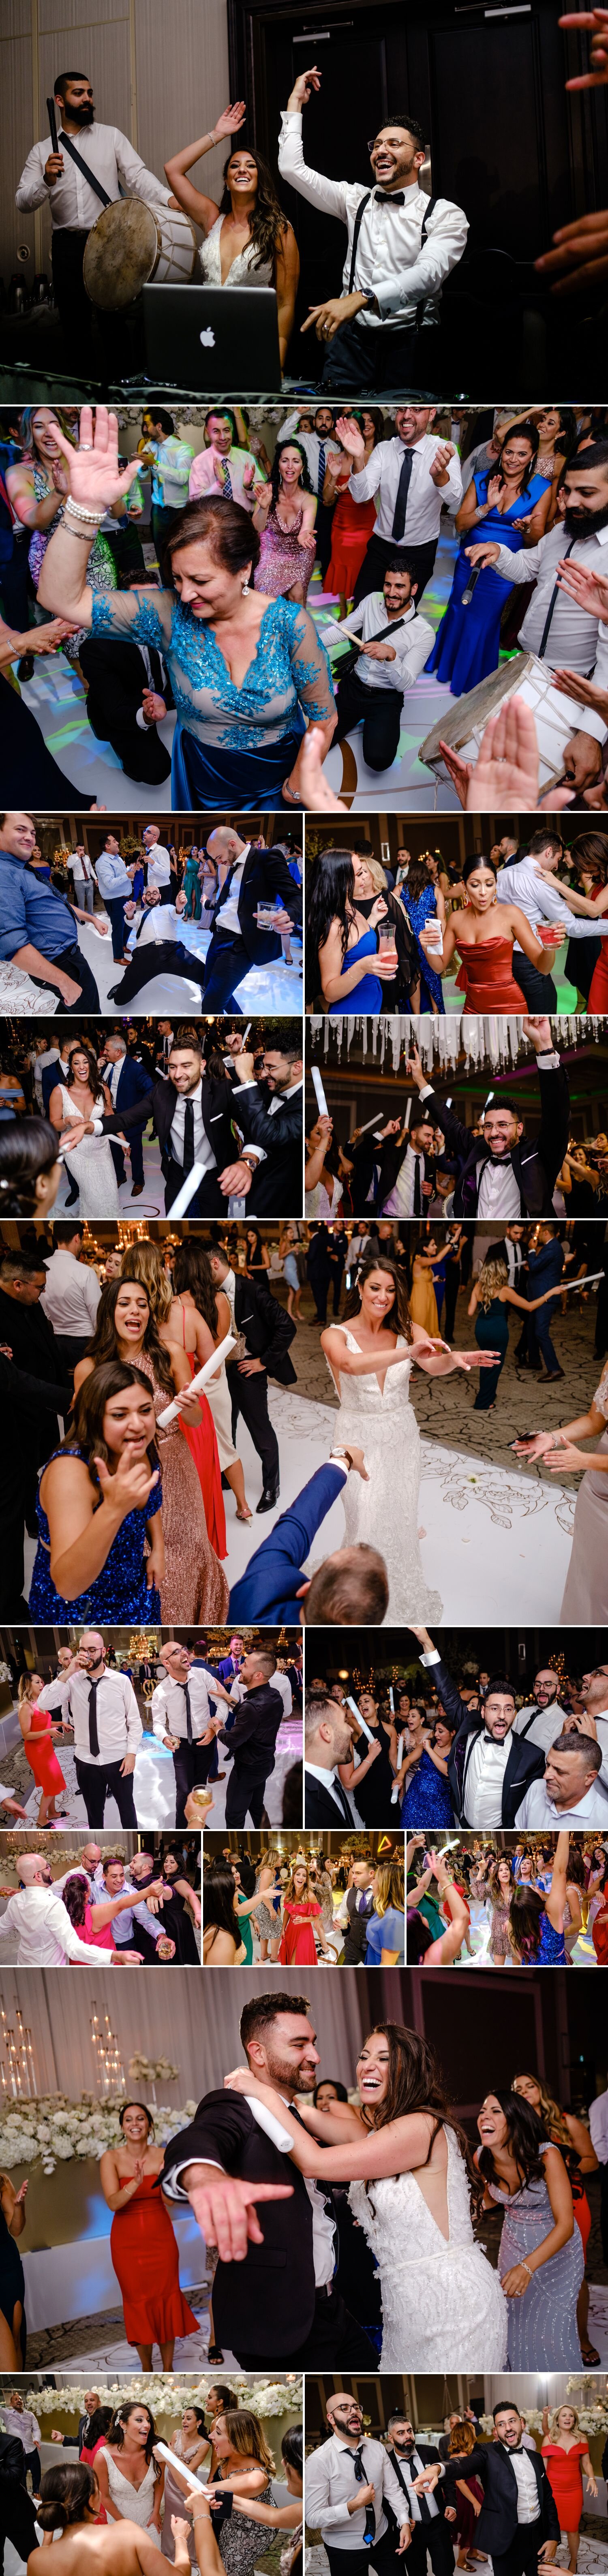 candid dance floor moments during a wedding reception at the infinity centre in ottawa ontario